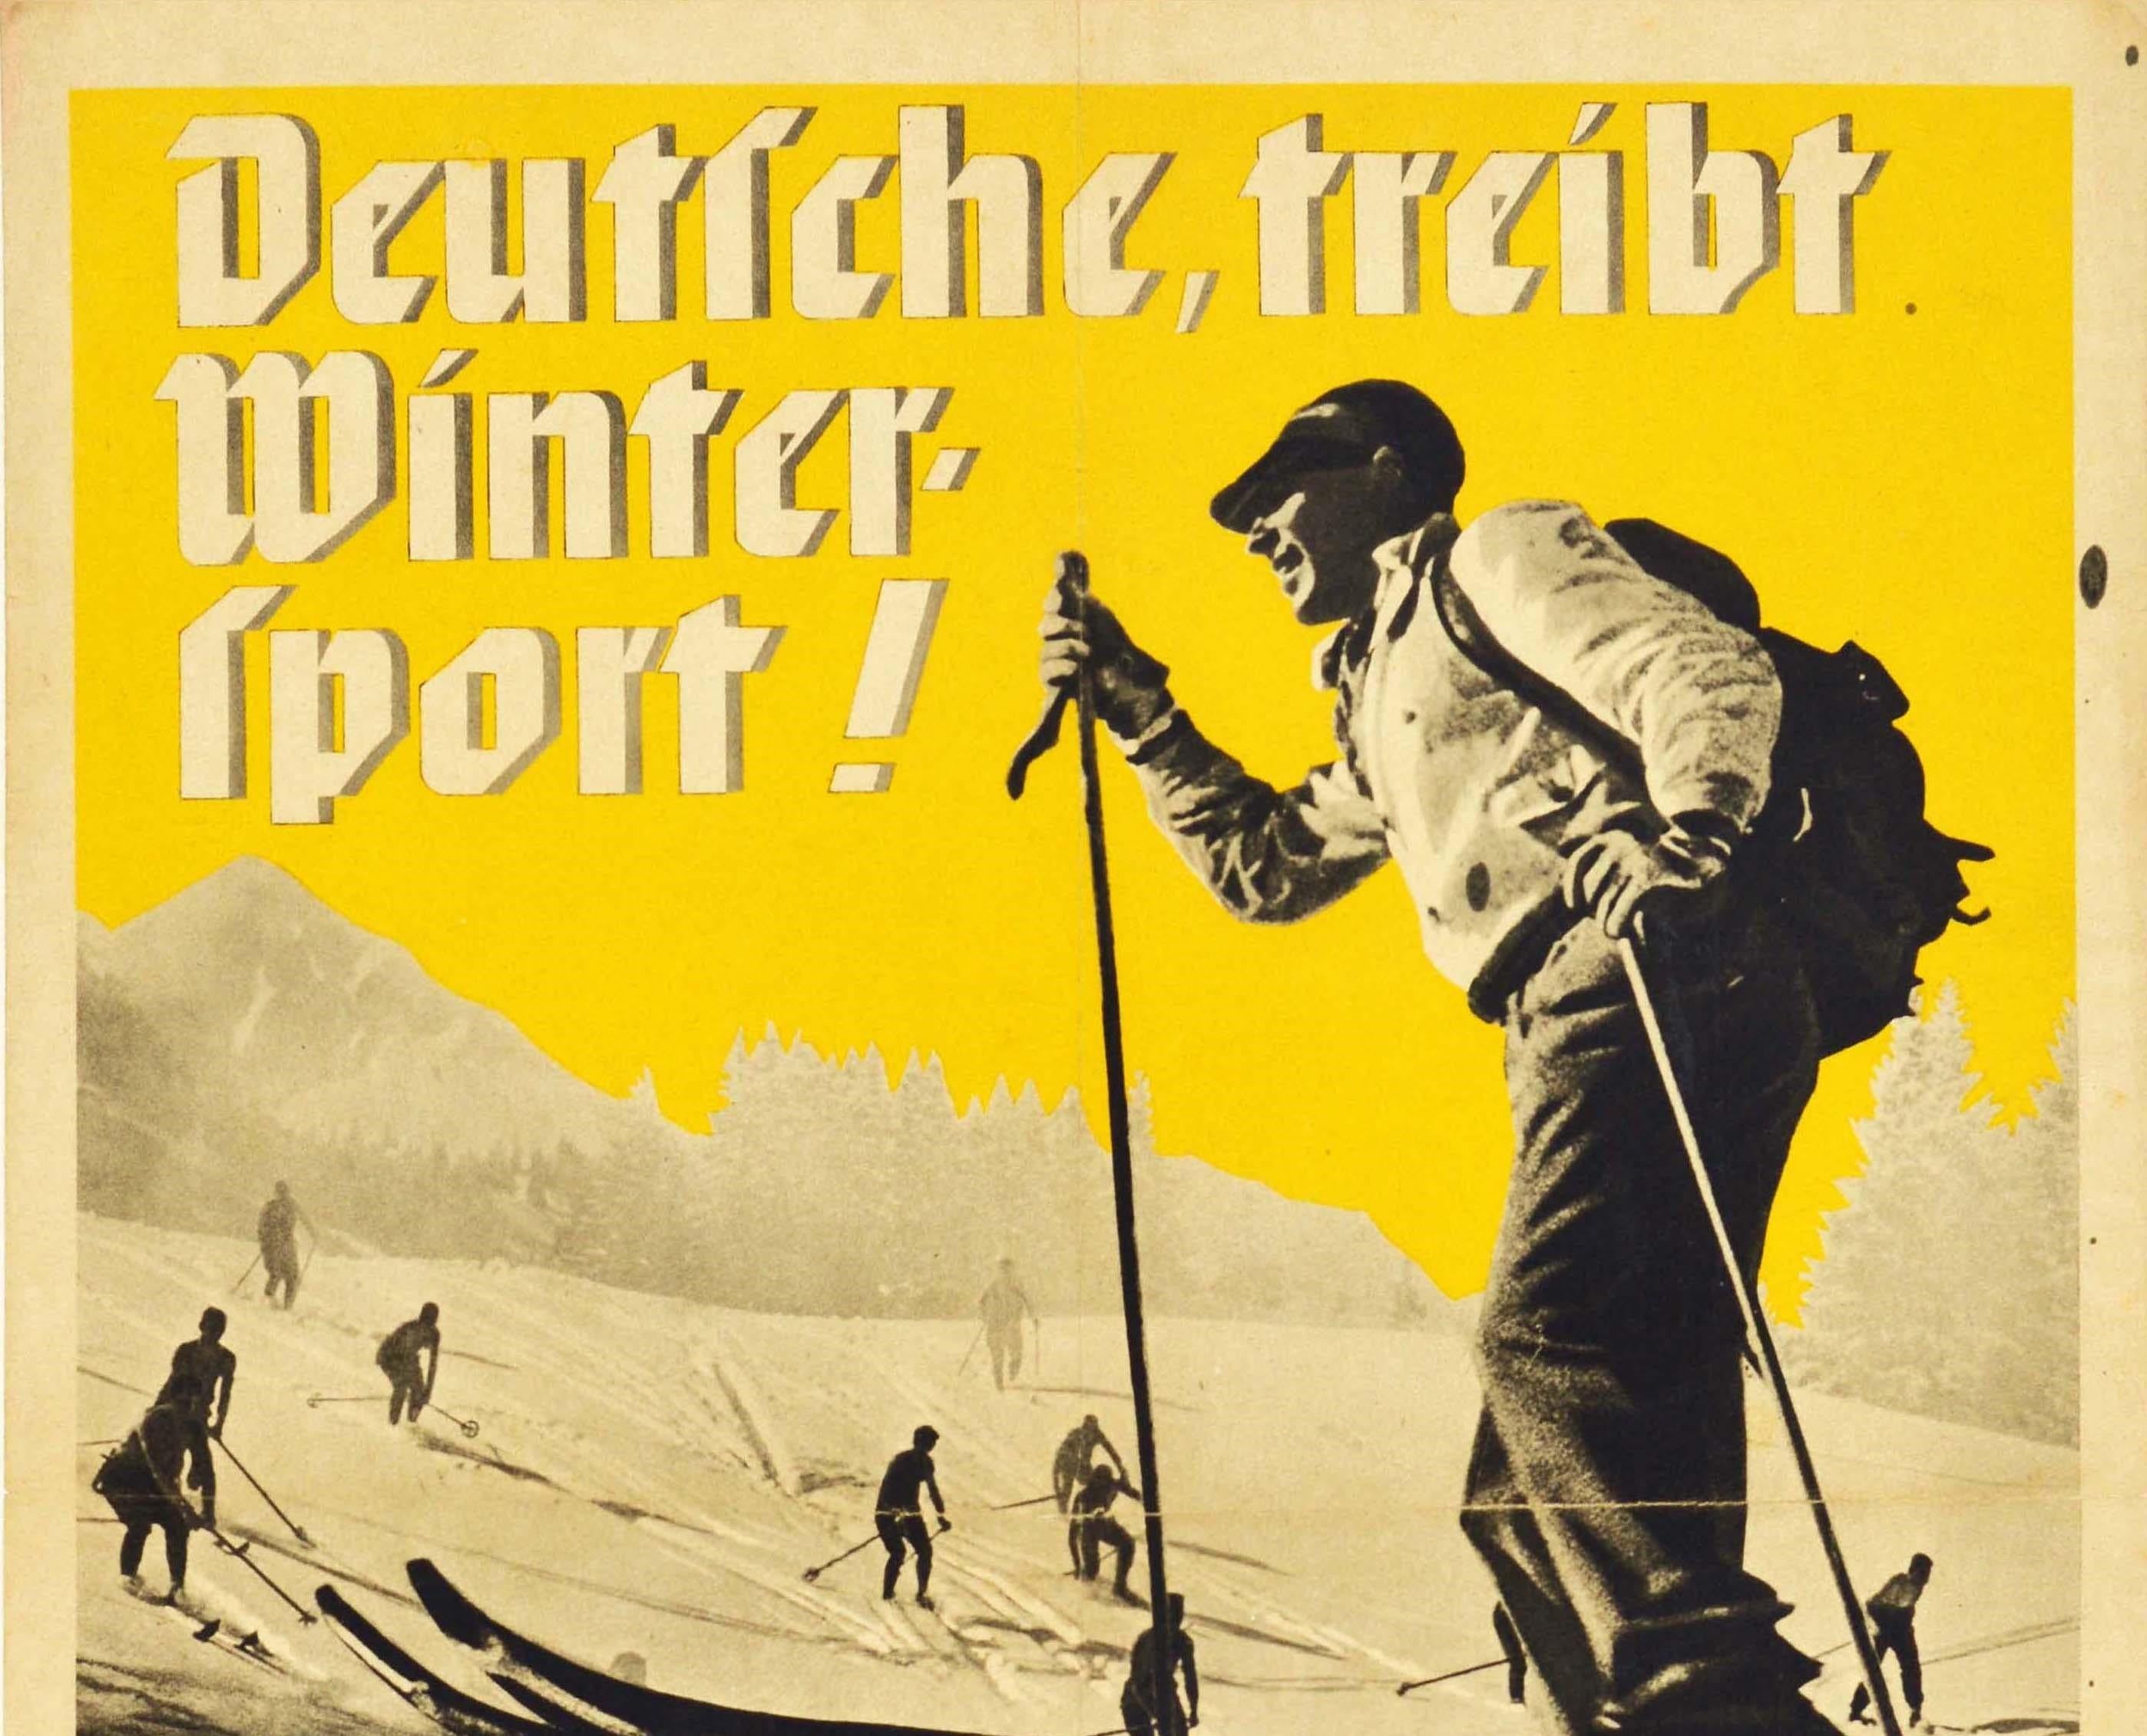 Original vintage poster for a promotional week of winter sports from 11 to 18 November 1934 - Germans, try winter sports! / Deutsche, treibt Wintersport! - featuring a smiling man lifting a ski in the foreground and skiers cautiously skiing down a